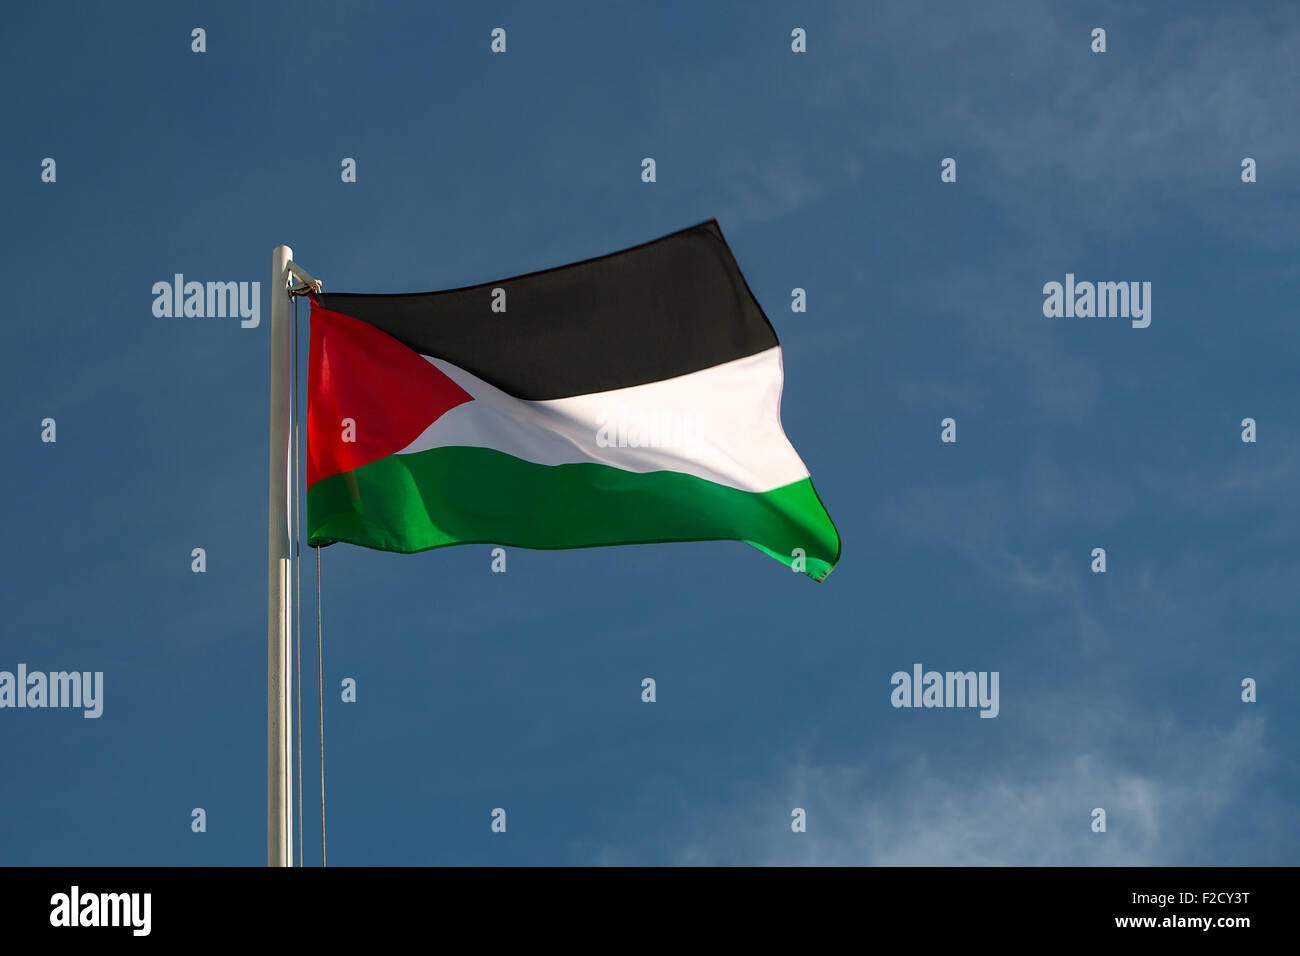 Palestine flag in front of a blue sky Stock Photo